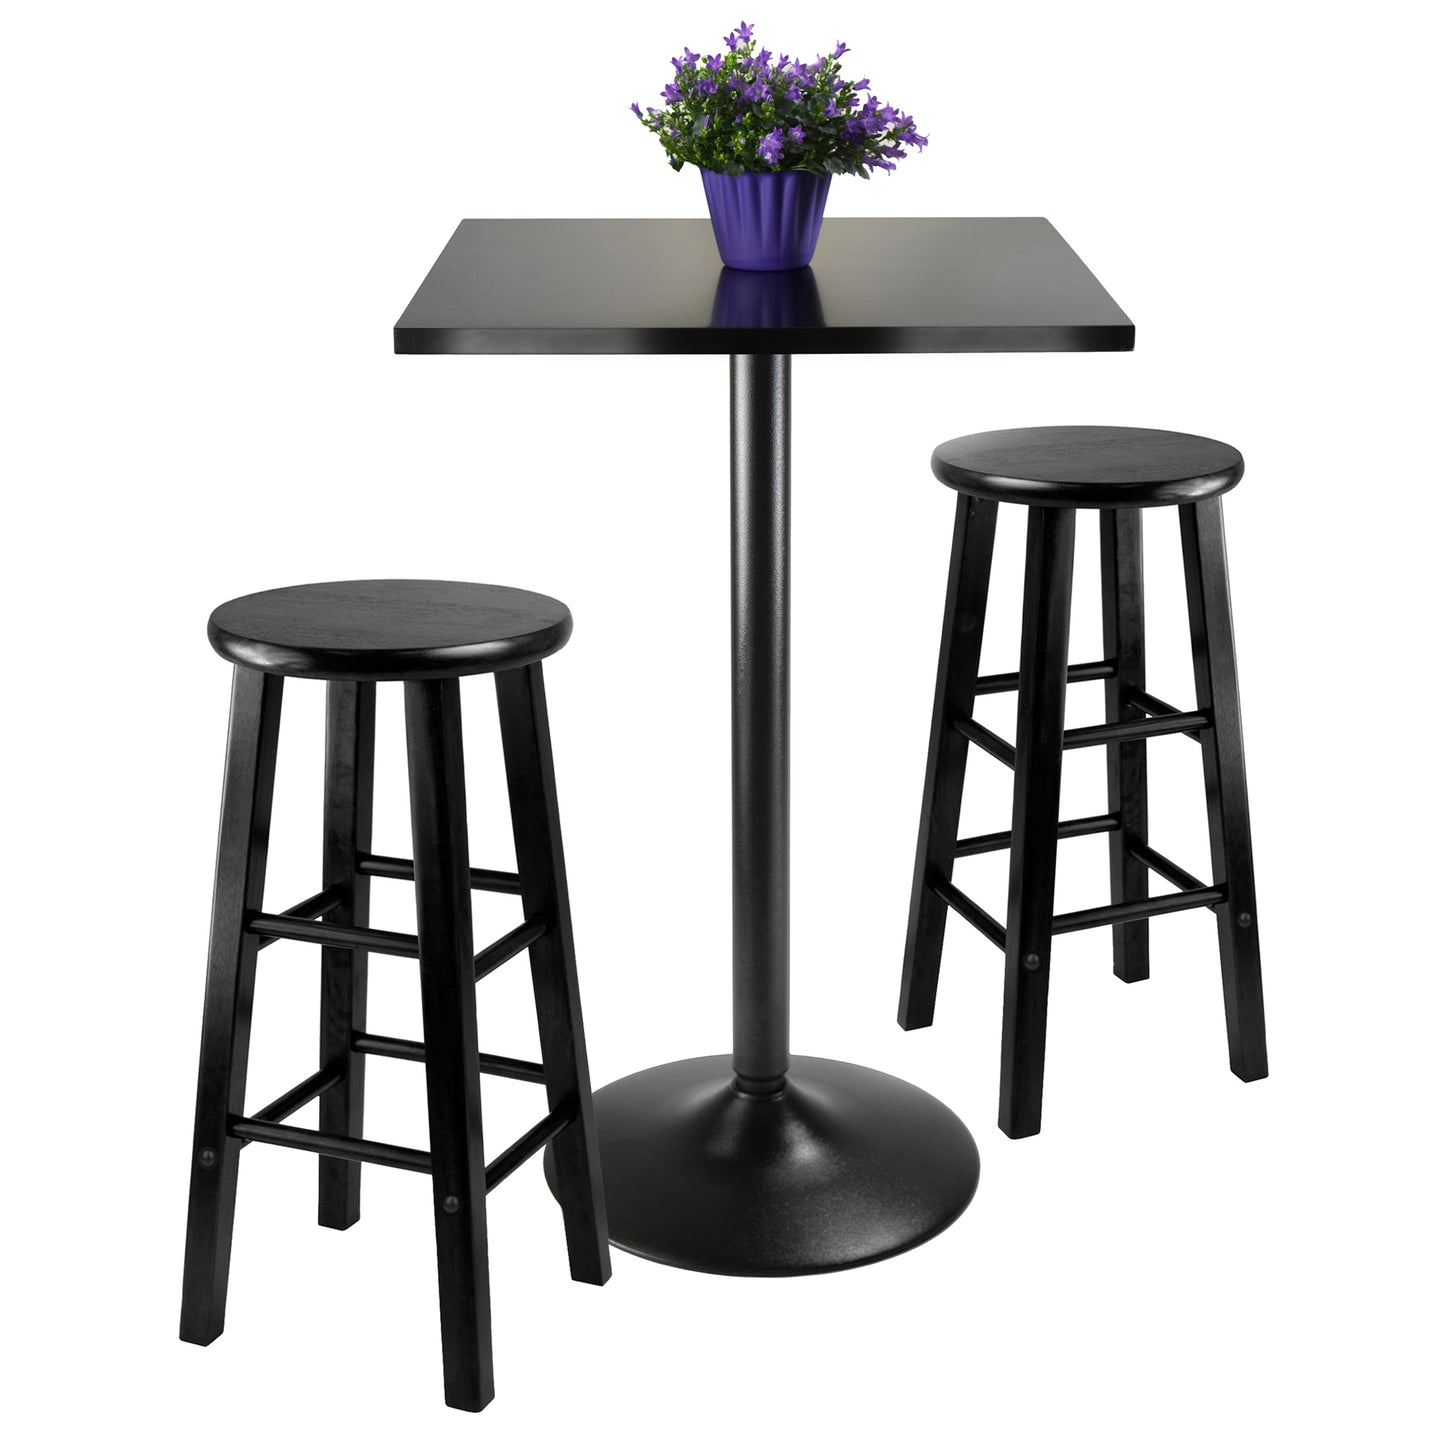 Obsidian 3-Pc Square Pub Table and Round Seat Counter Stools, Black